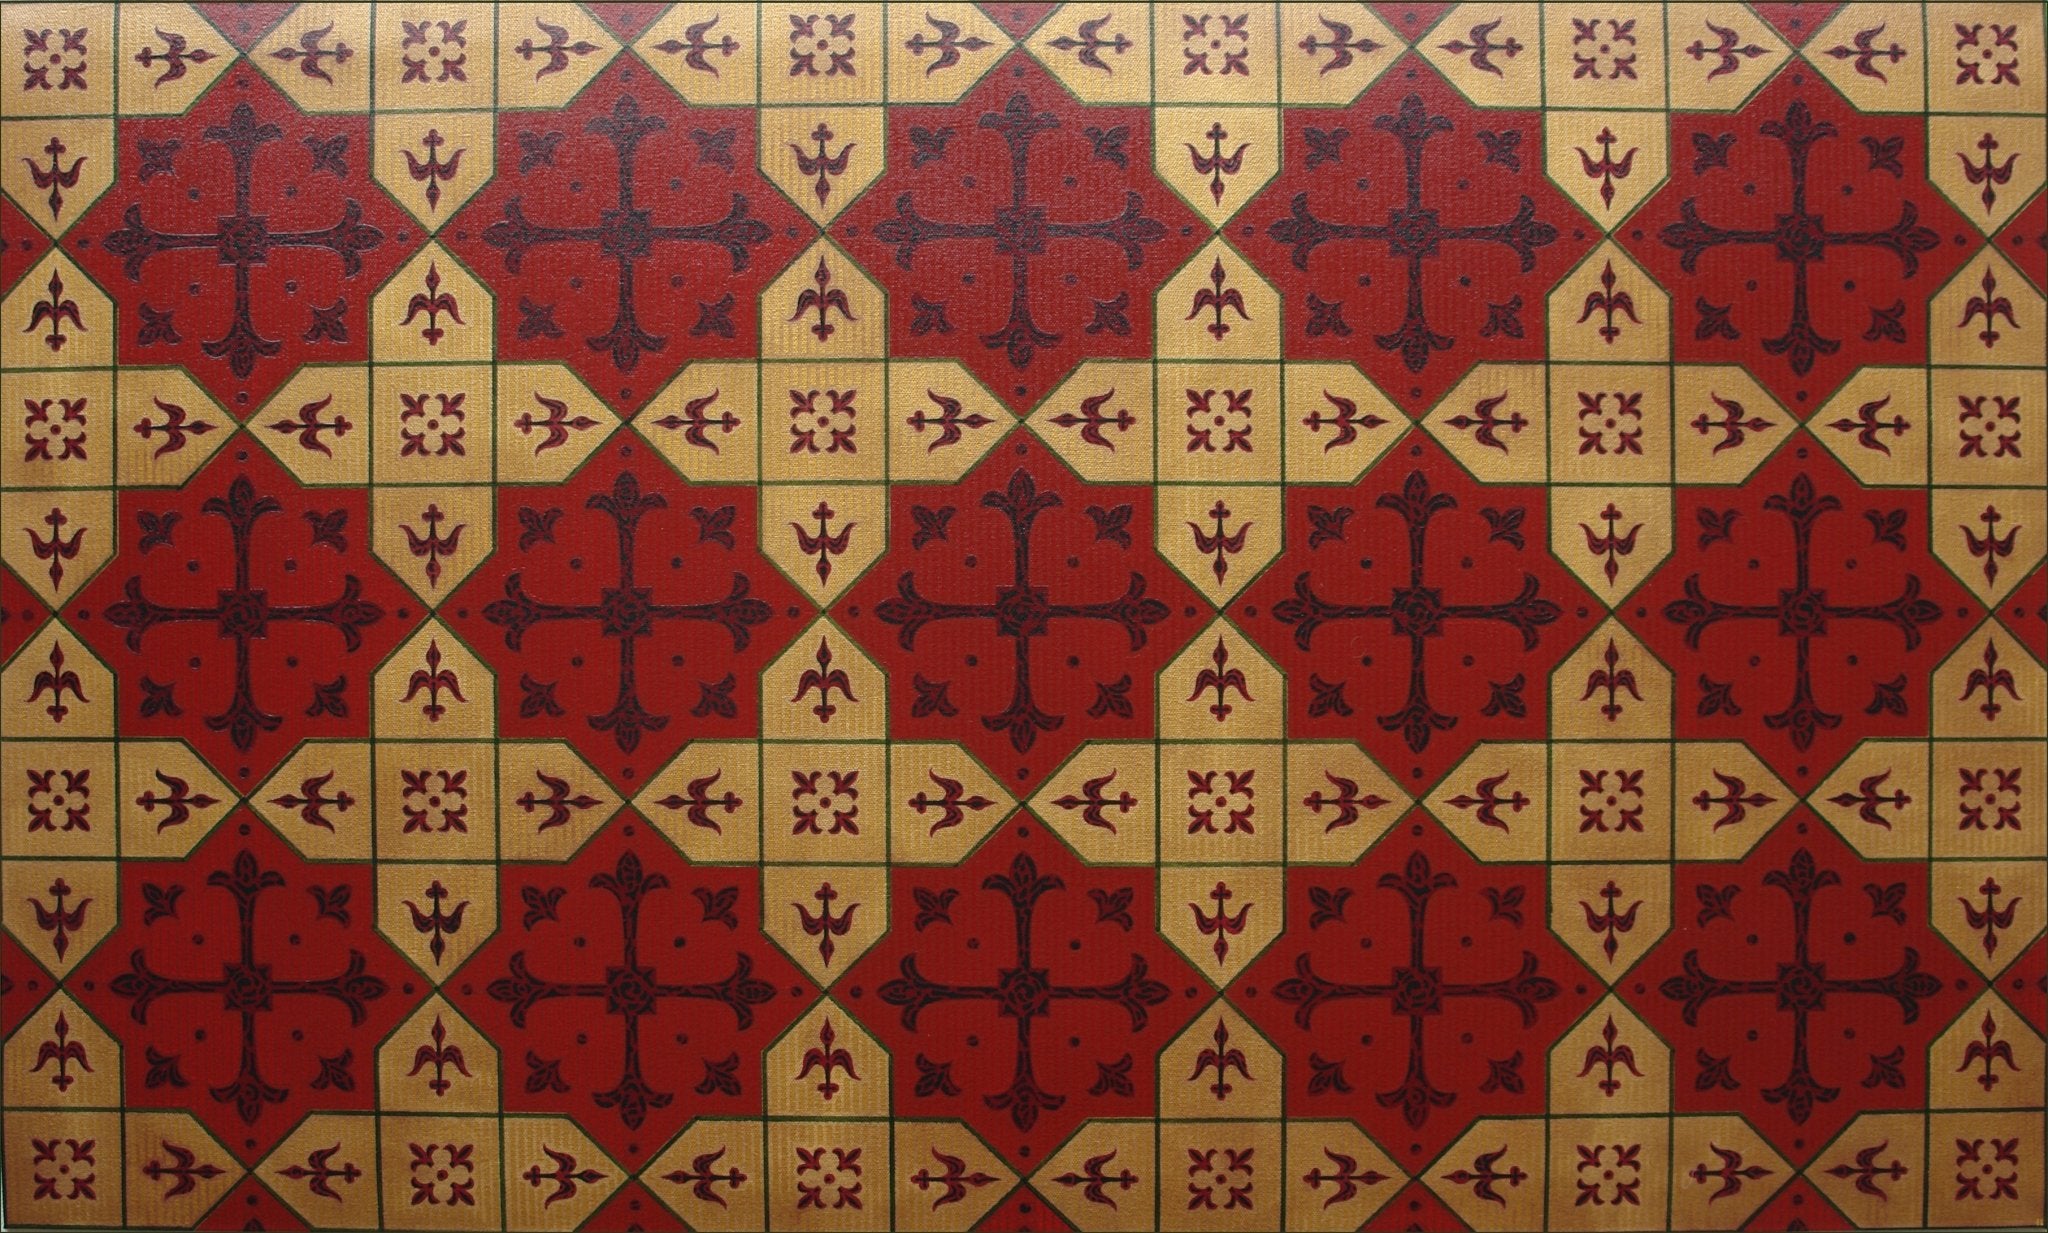 The full image of Hay House Floorcloth #5.